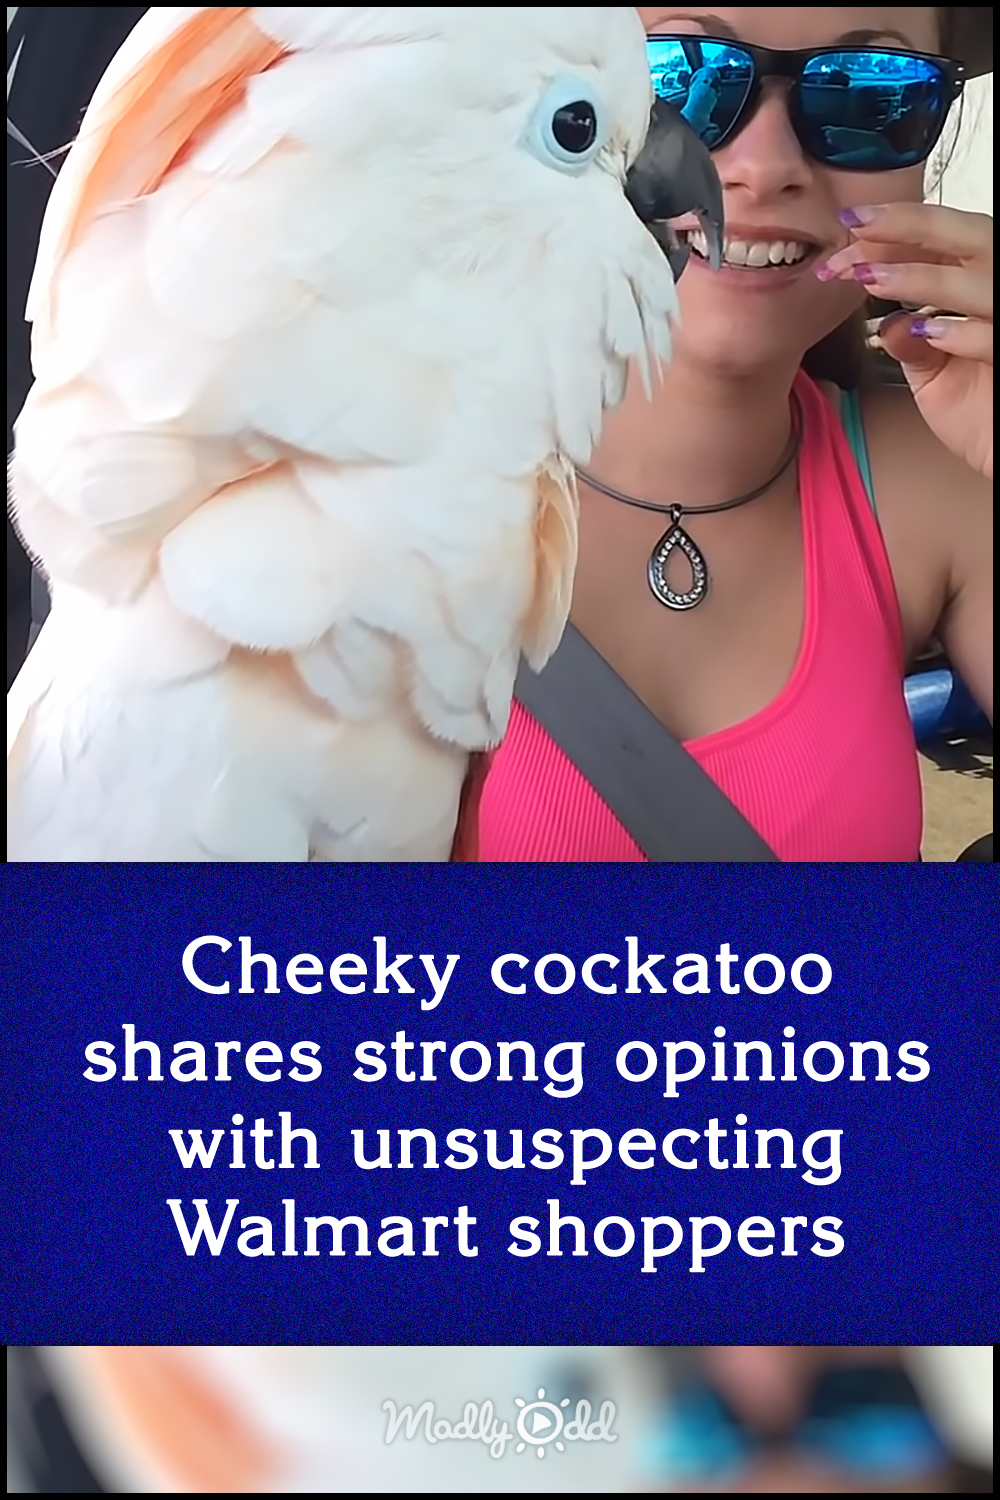 Cheeky cockatoo shares strong opinions with unsuspecting Walmart shoppers